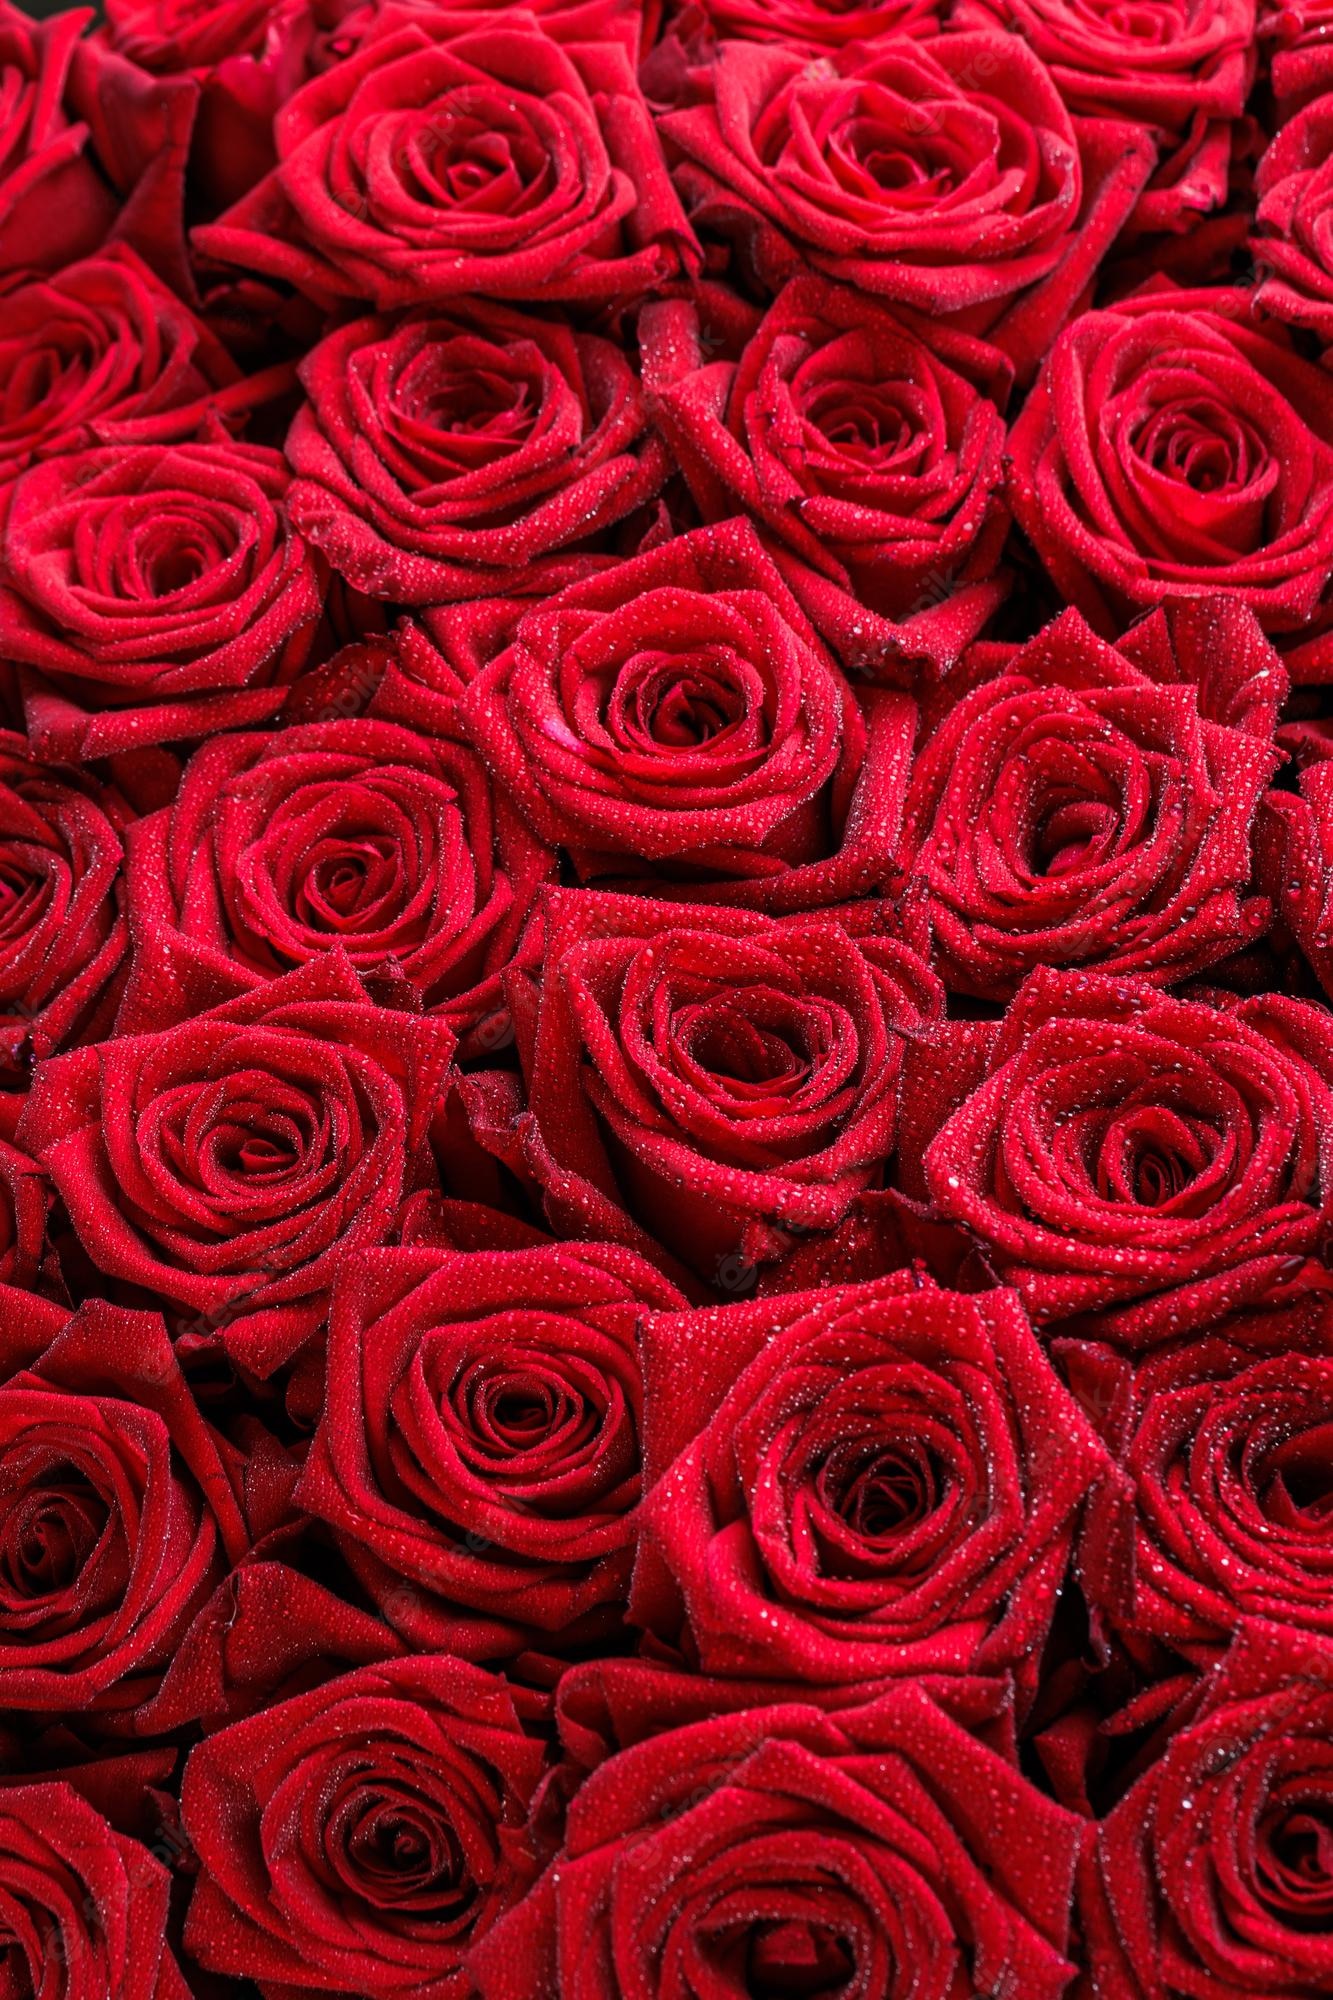 Red Rose Phone Wallpapers